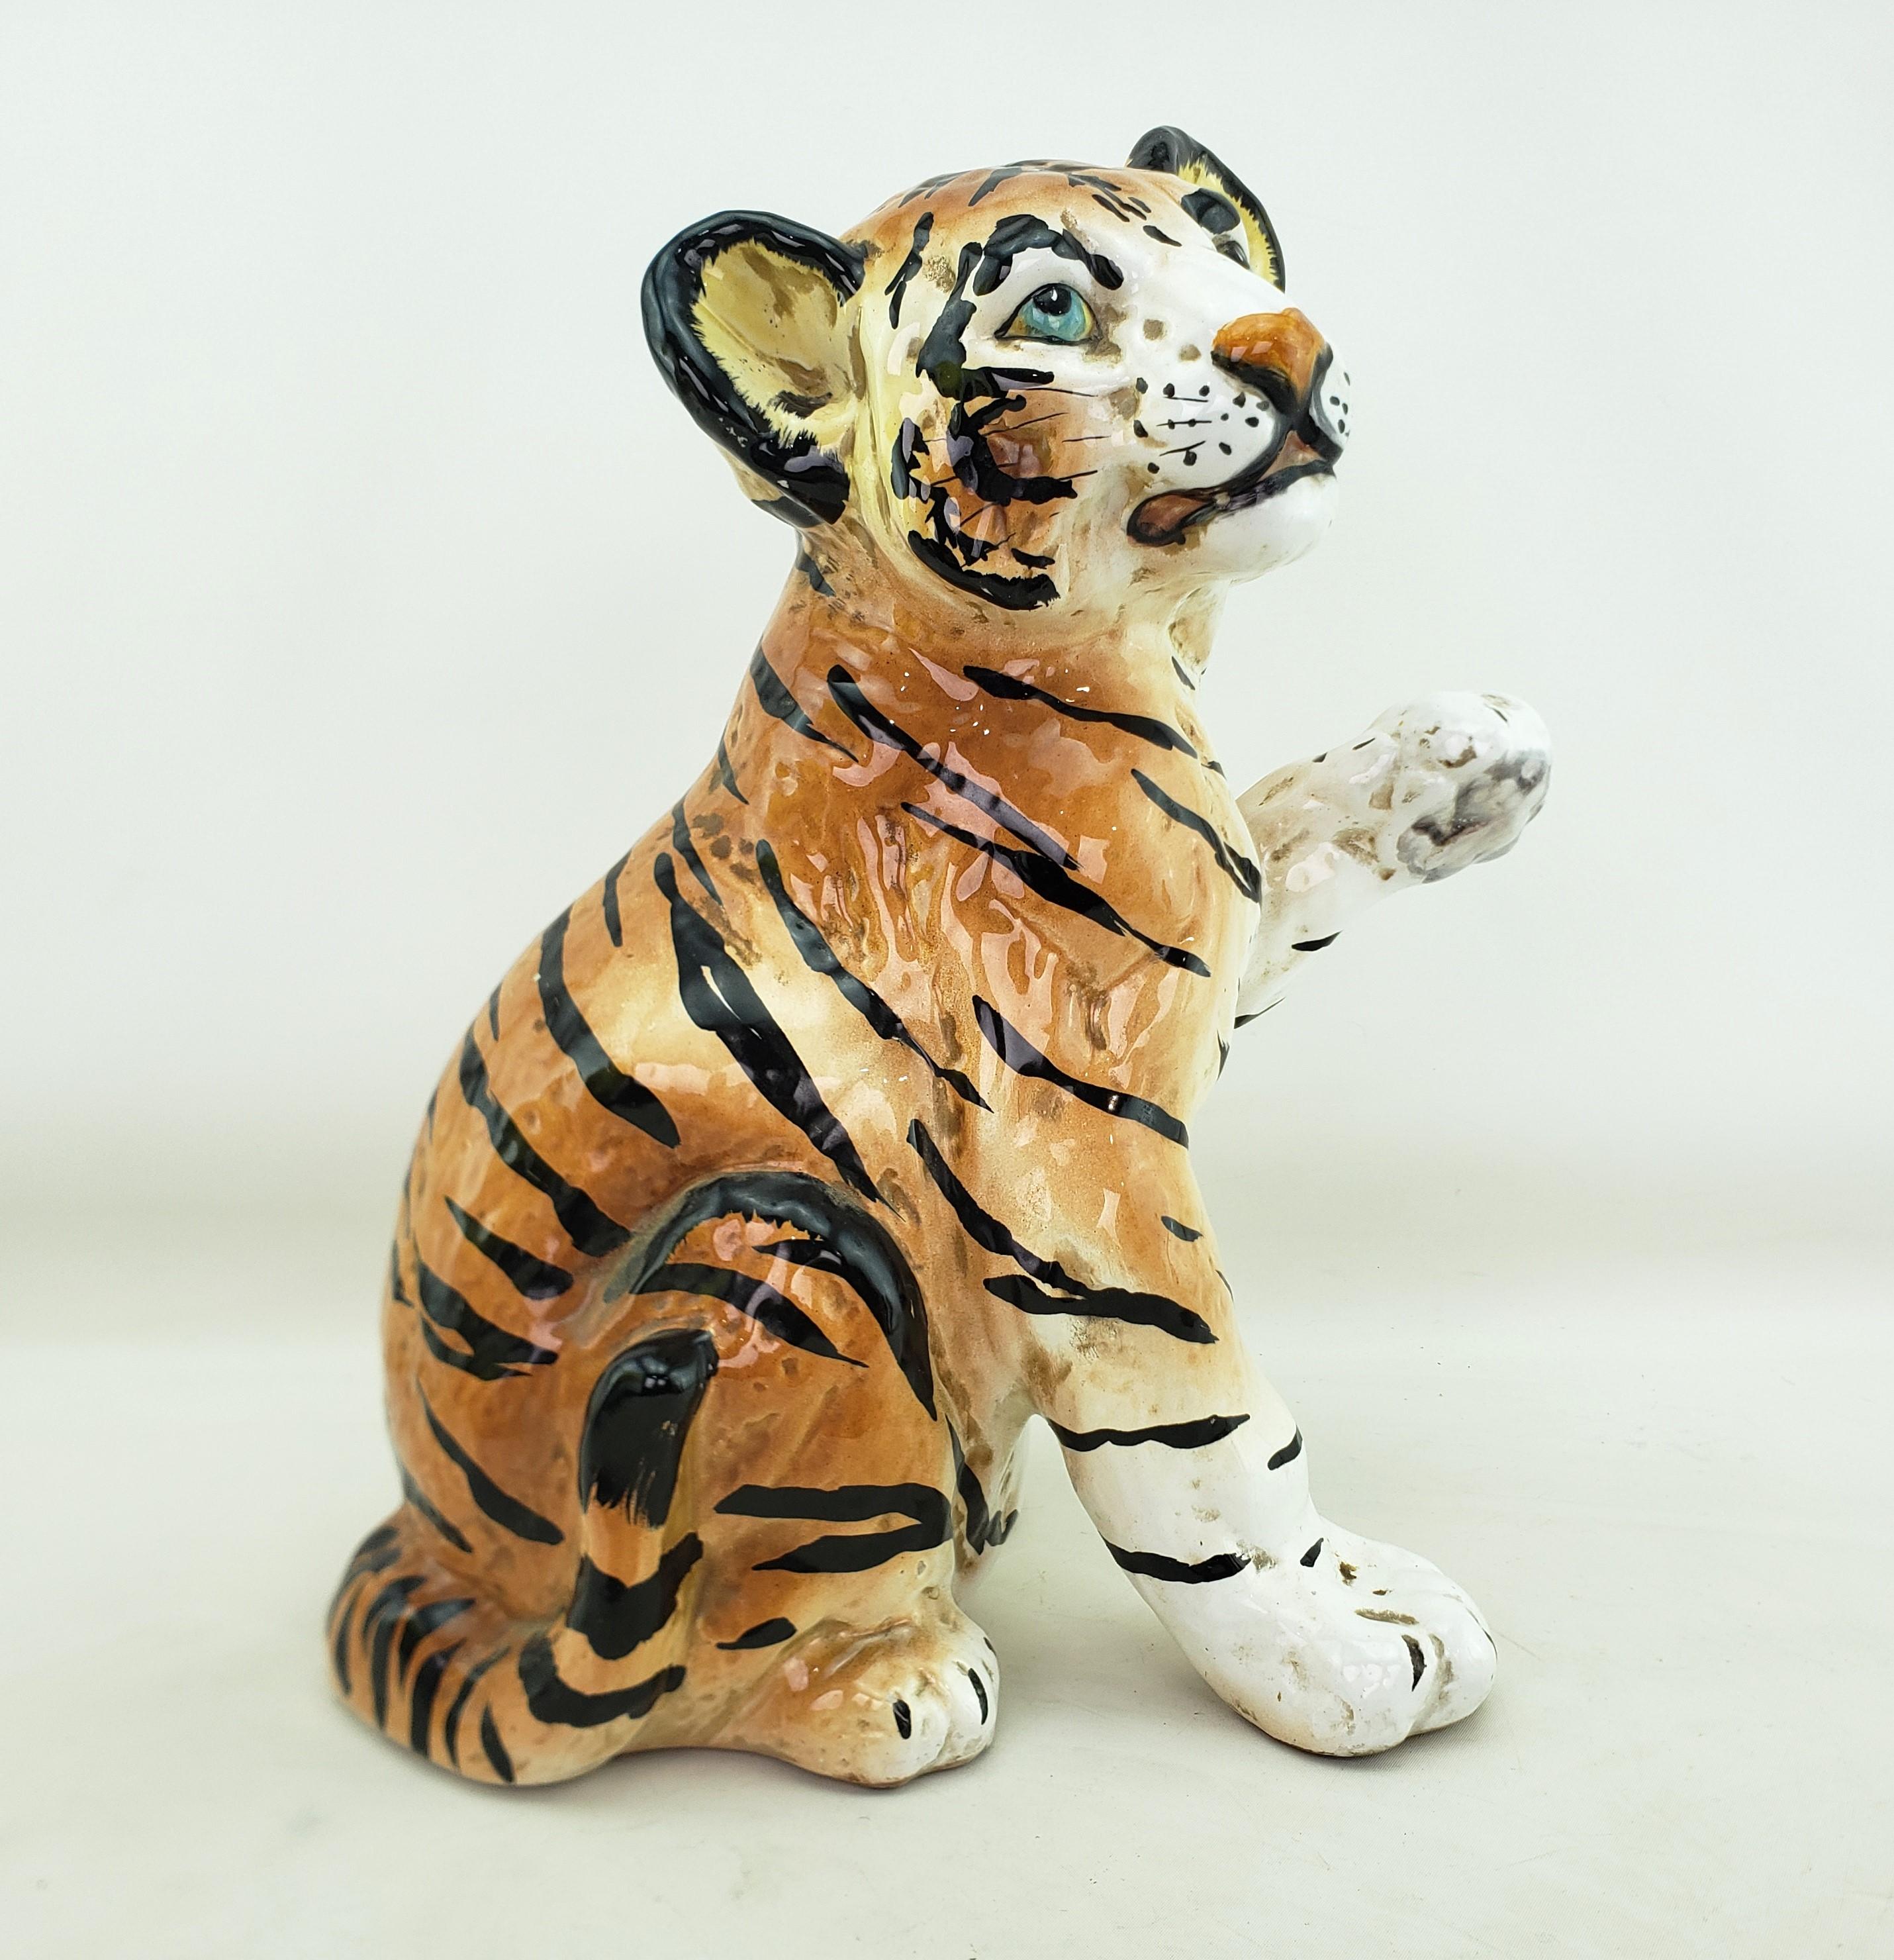 This sculpture shows no artist's signature, but originated from Italy and dates to approximately 1965 and done in the Mid-Century Modern Ronzan style. The sculpture is composed of thick ceramics depicting a seated tiger cub which has been